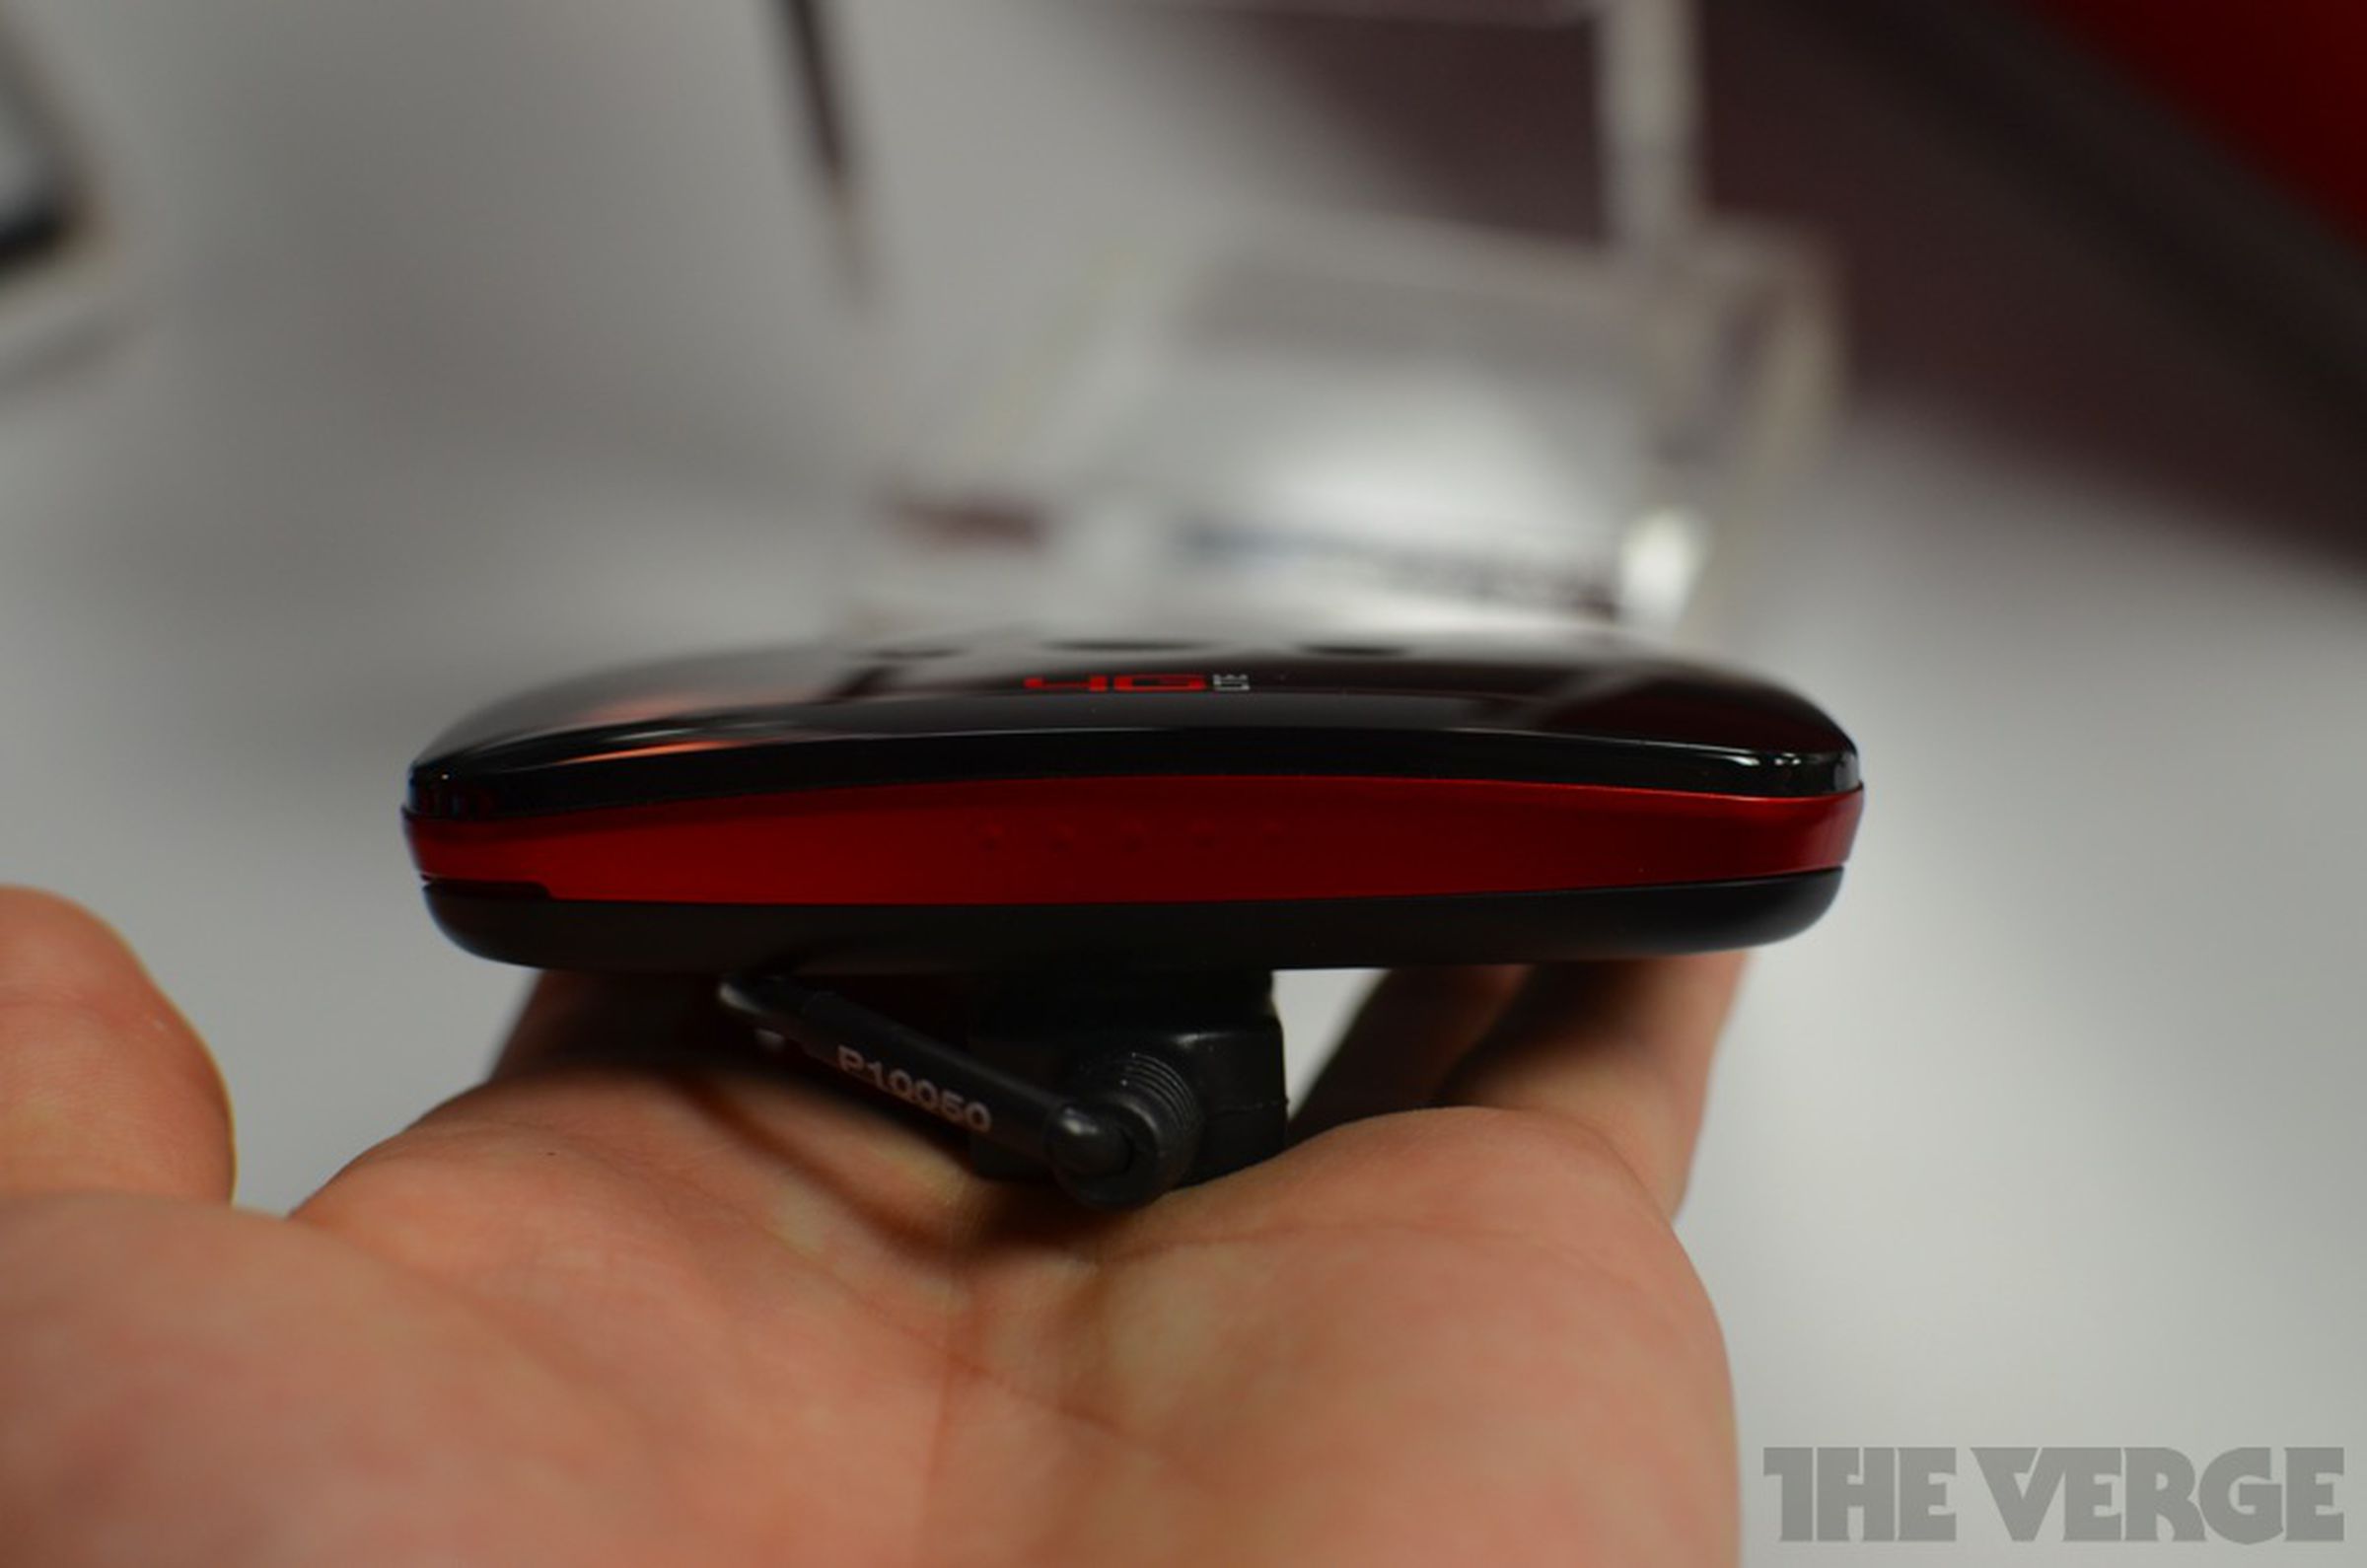 ZTE EuFi890 mobile hotspot hands-on pictures